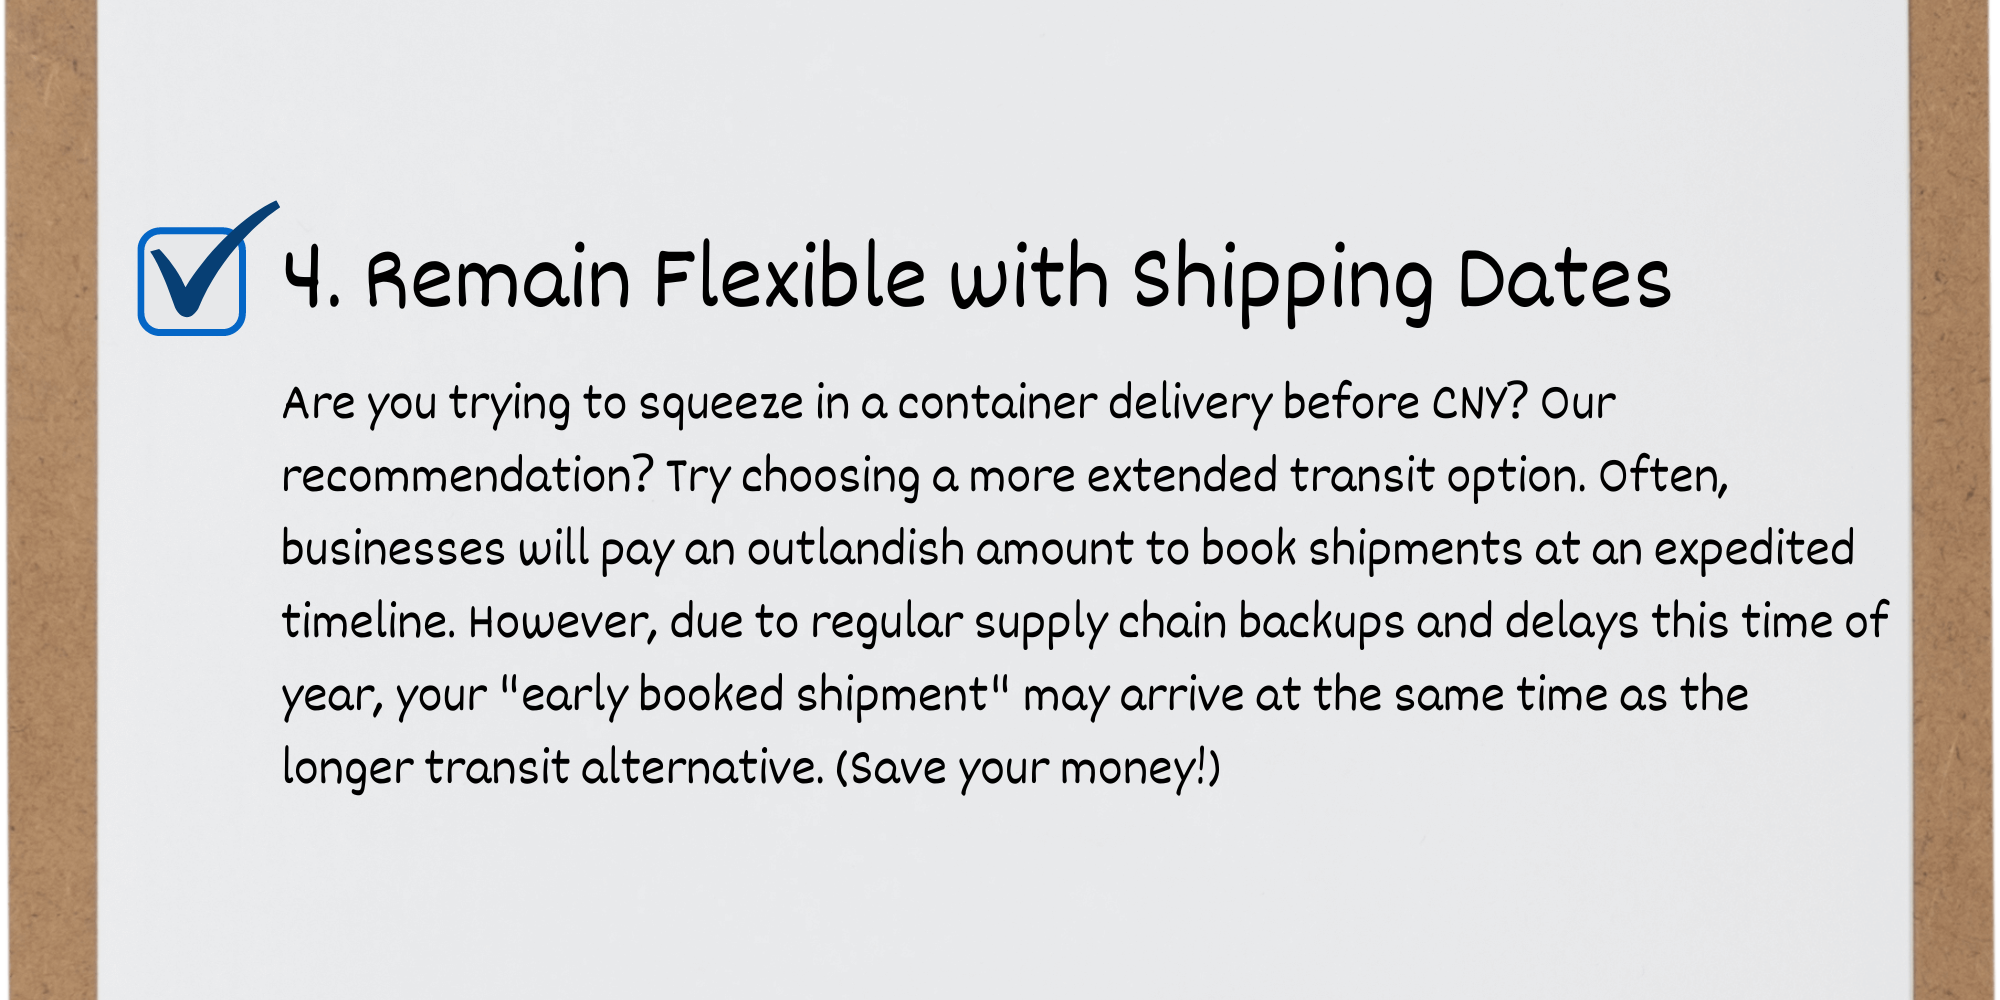 4.-Remain-Flexible-with-Shipping-Dates.png